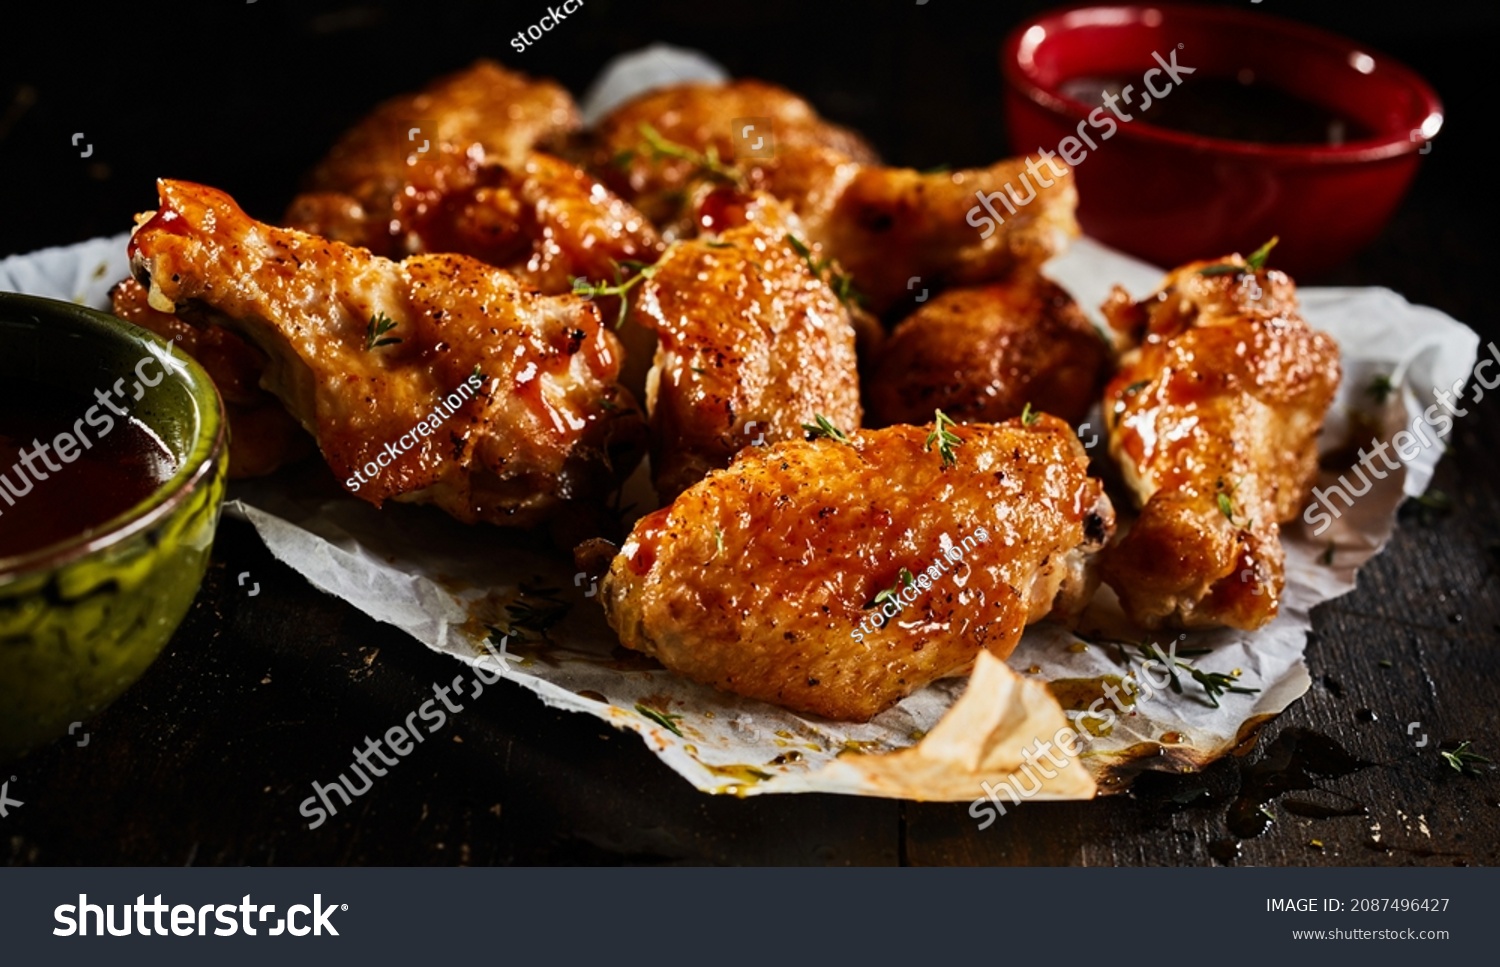 High angle of appetizing BBQ chicken wings with herbs served on paper on dark table with sauce in bowls in studio #2087496427